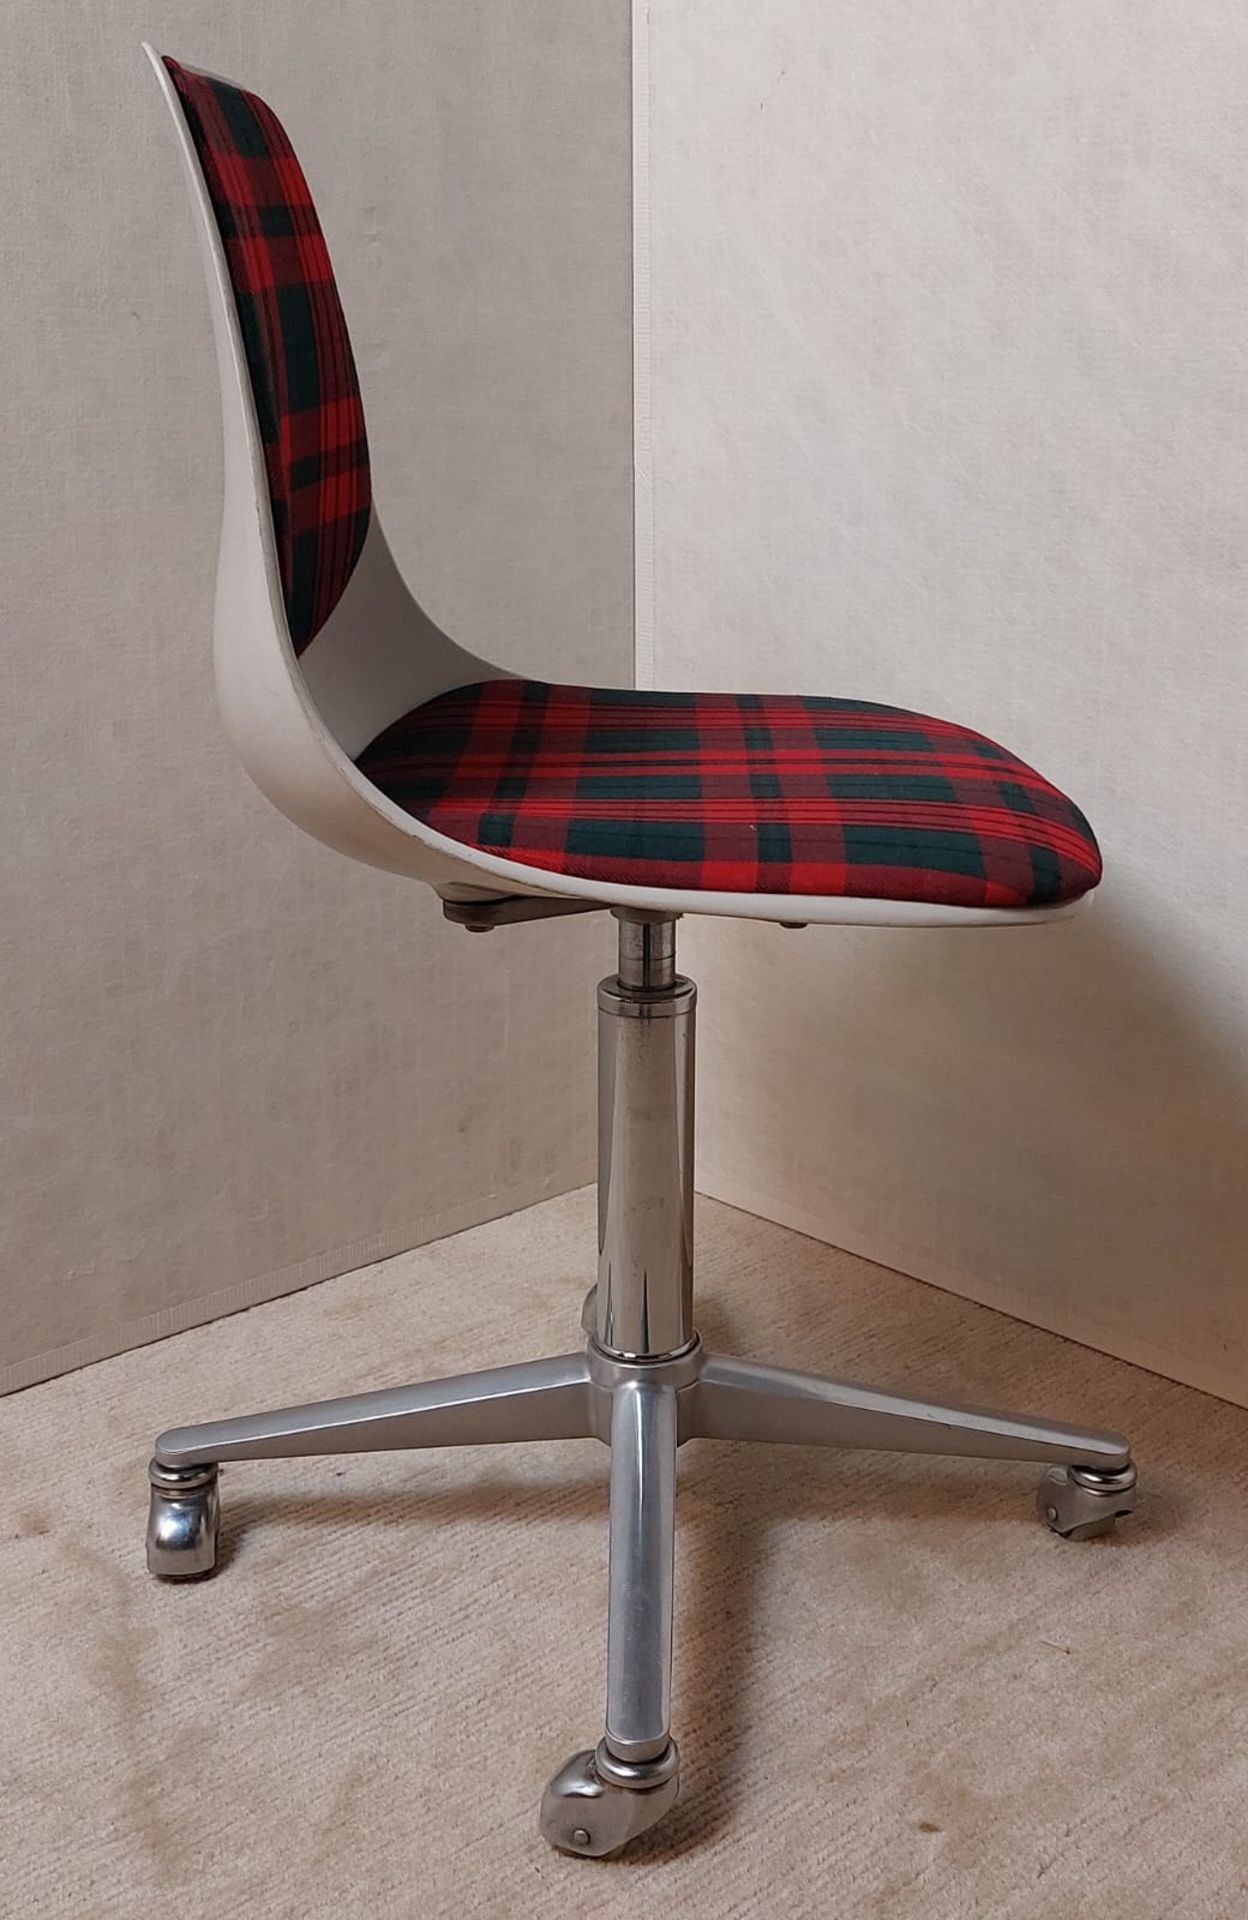 Wilhahn, design office chair. - Image 7 of 11